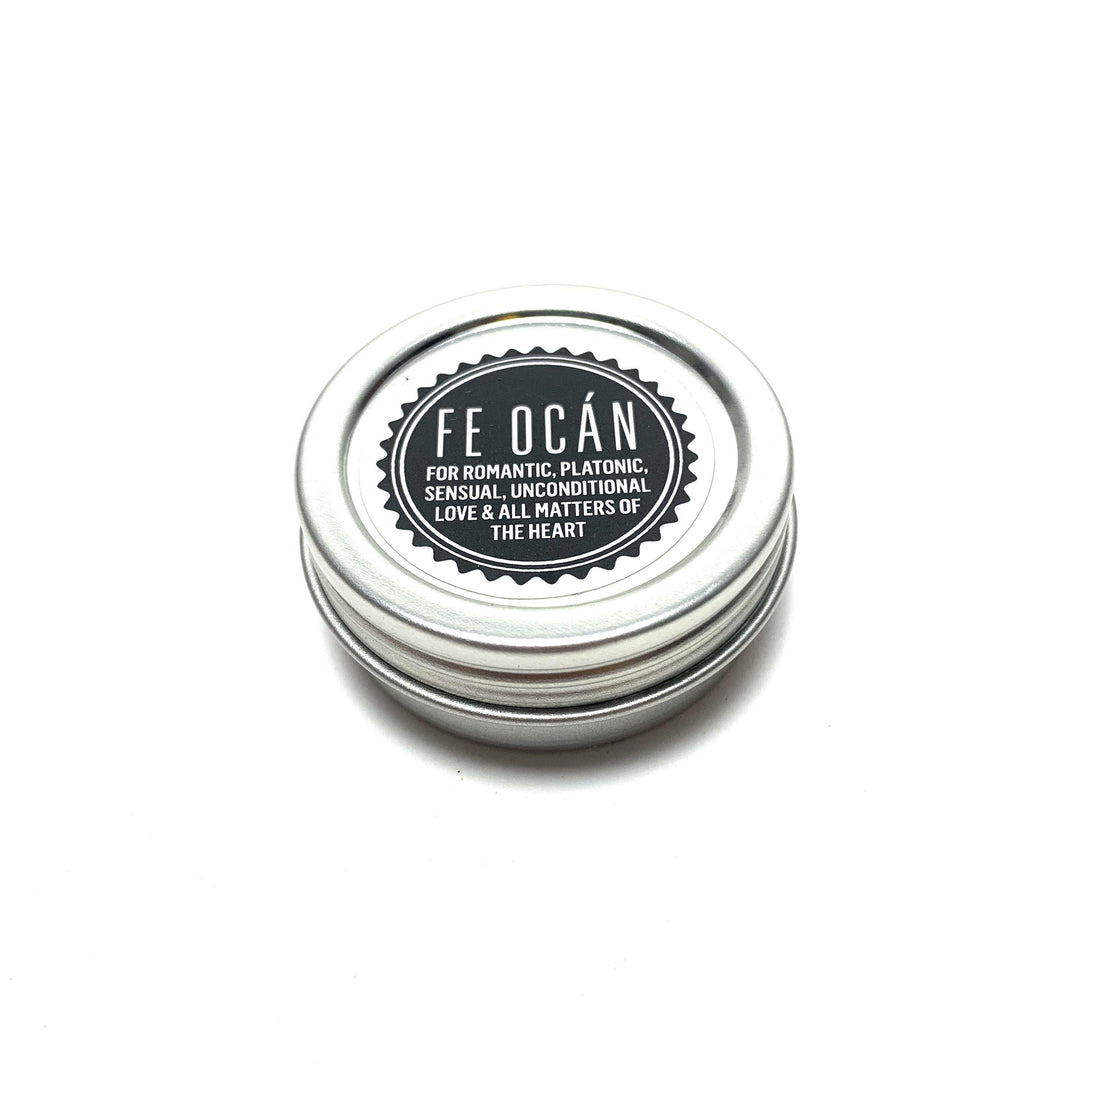 Fe Ocan Incense Blend HOI Incense Blend House of Intuition $6.00 Tiny Tin .5 oz 